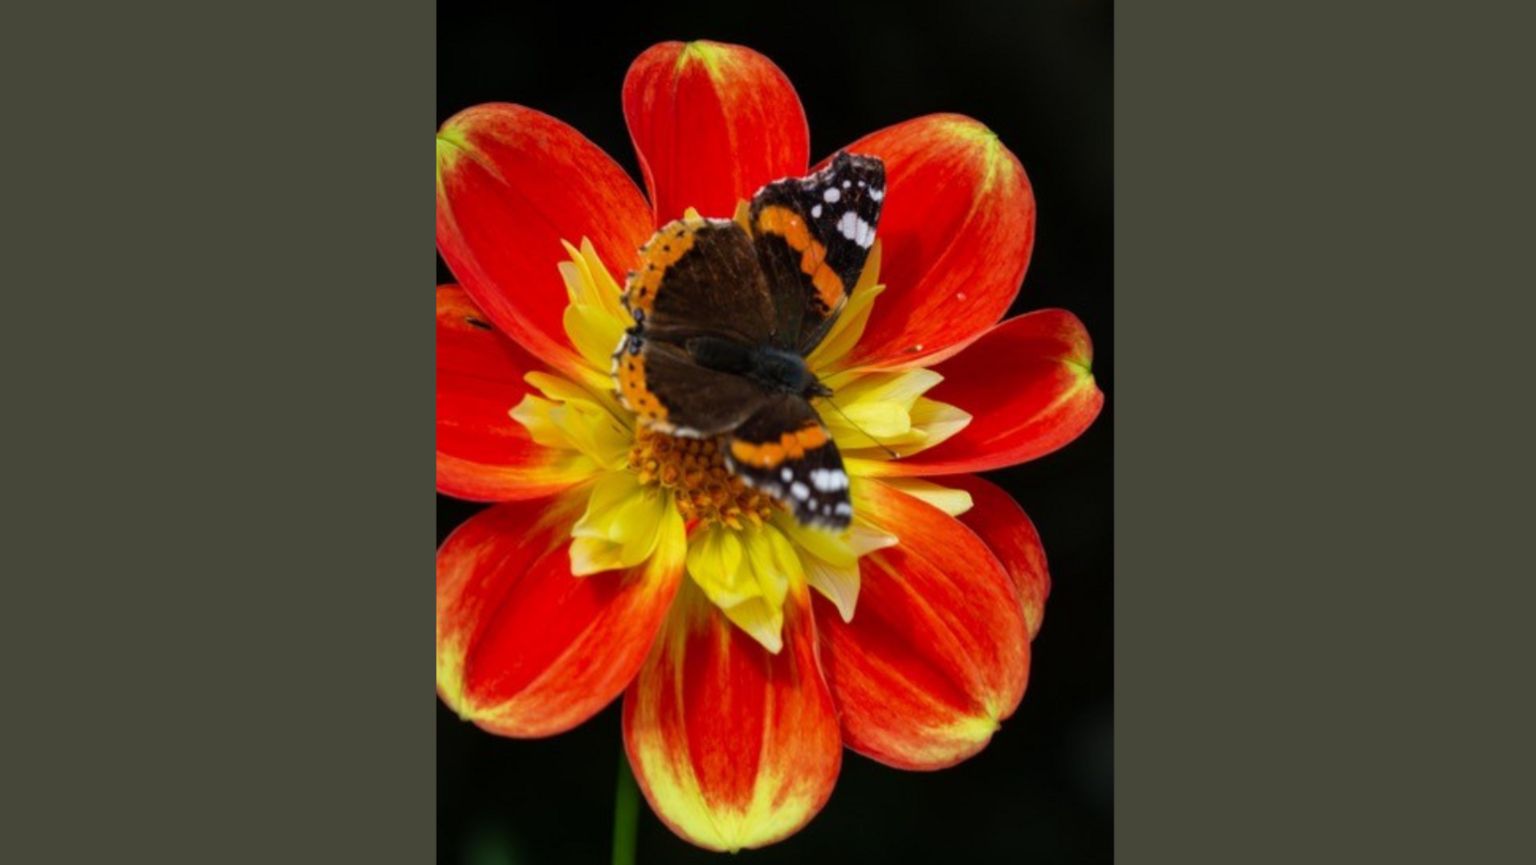 Red Admiral butterflies on dahlia plant